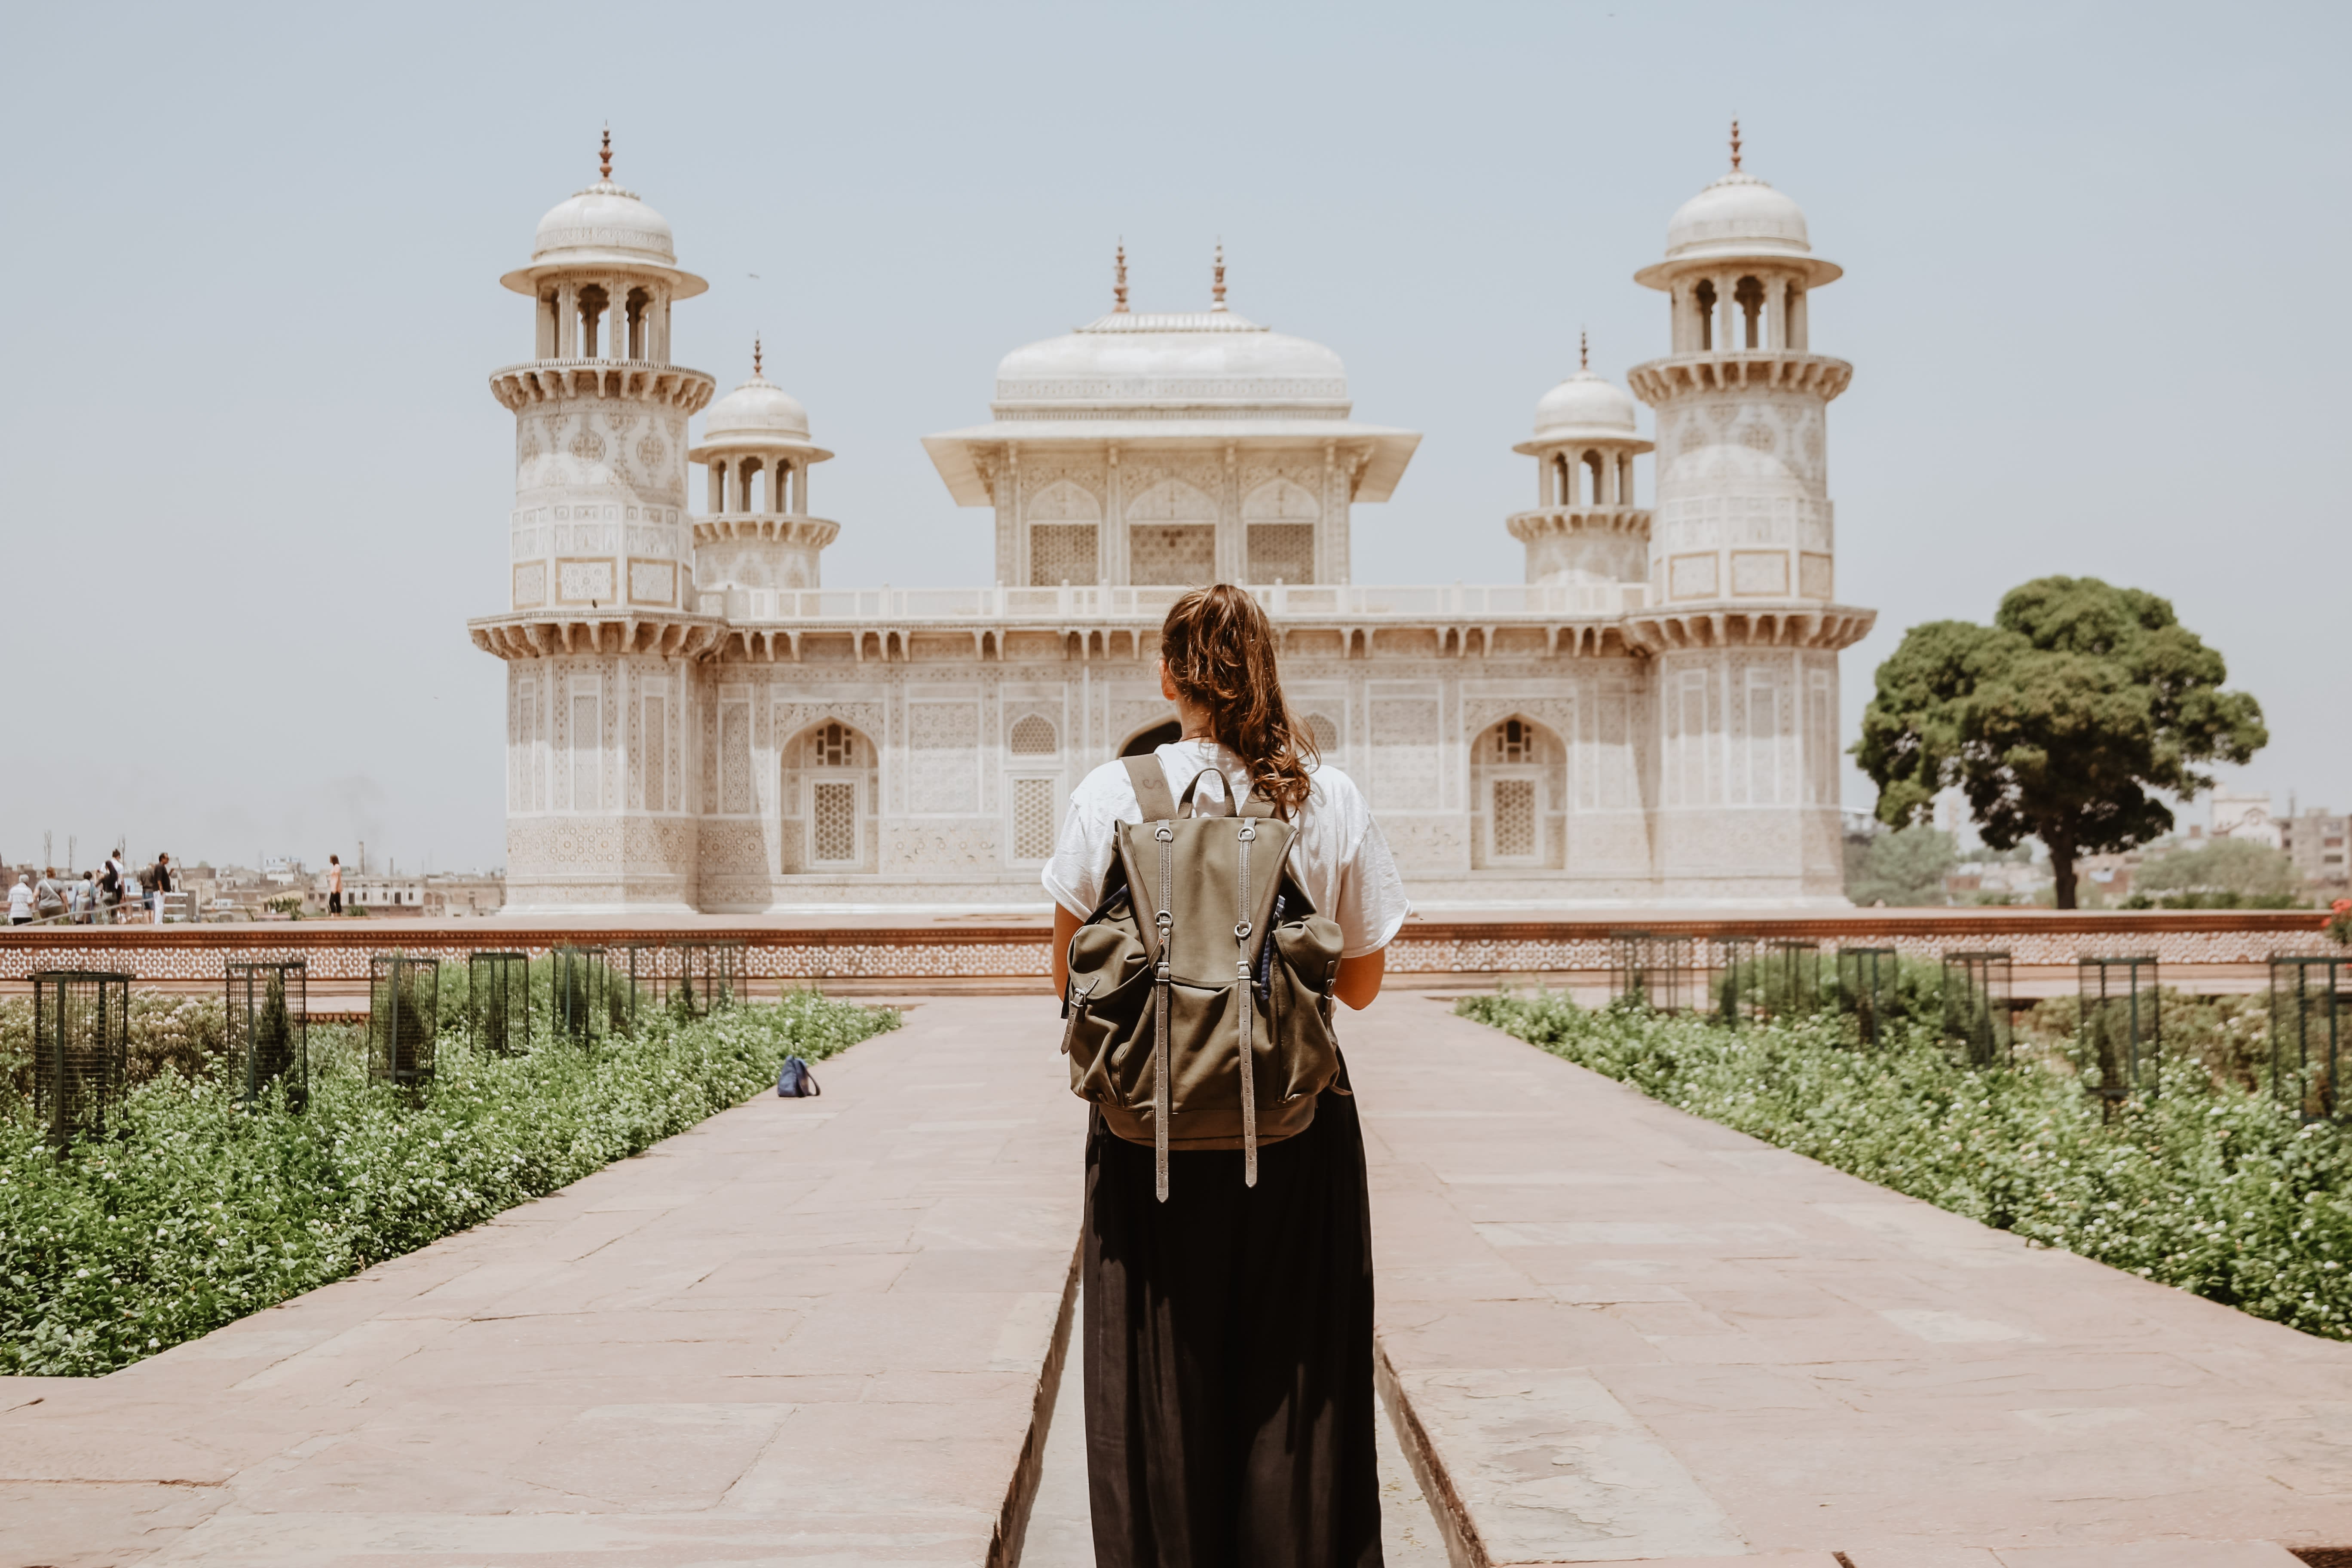 Plan your trip to India with my guide